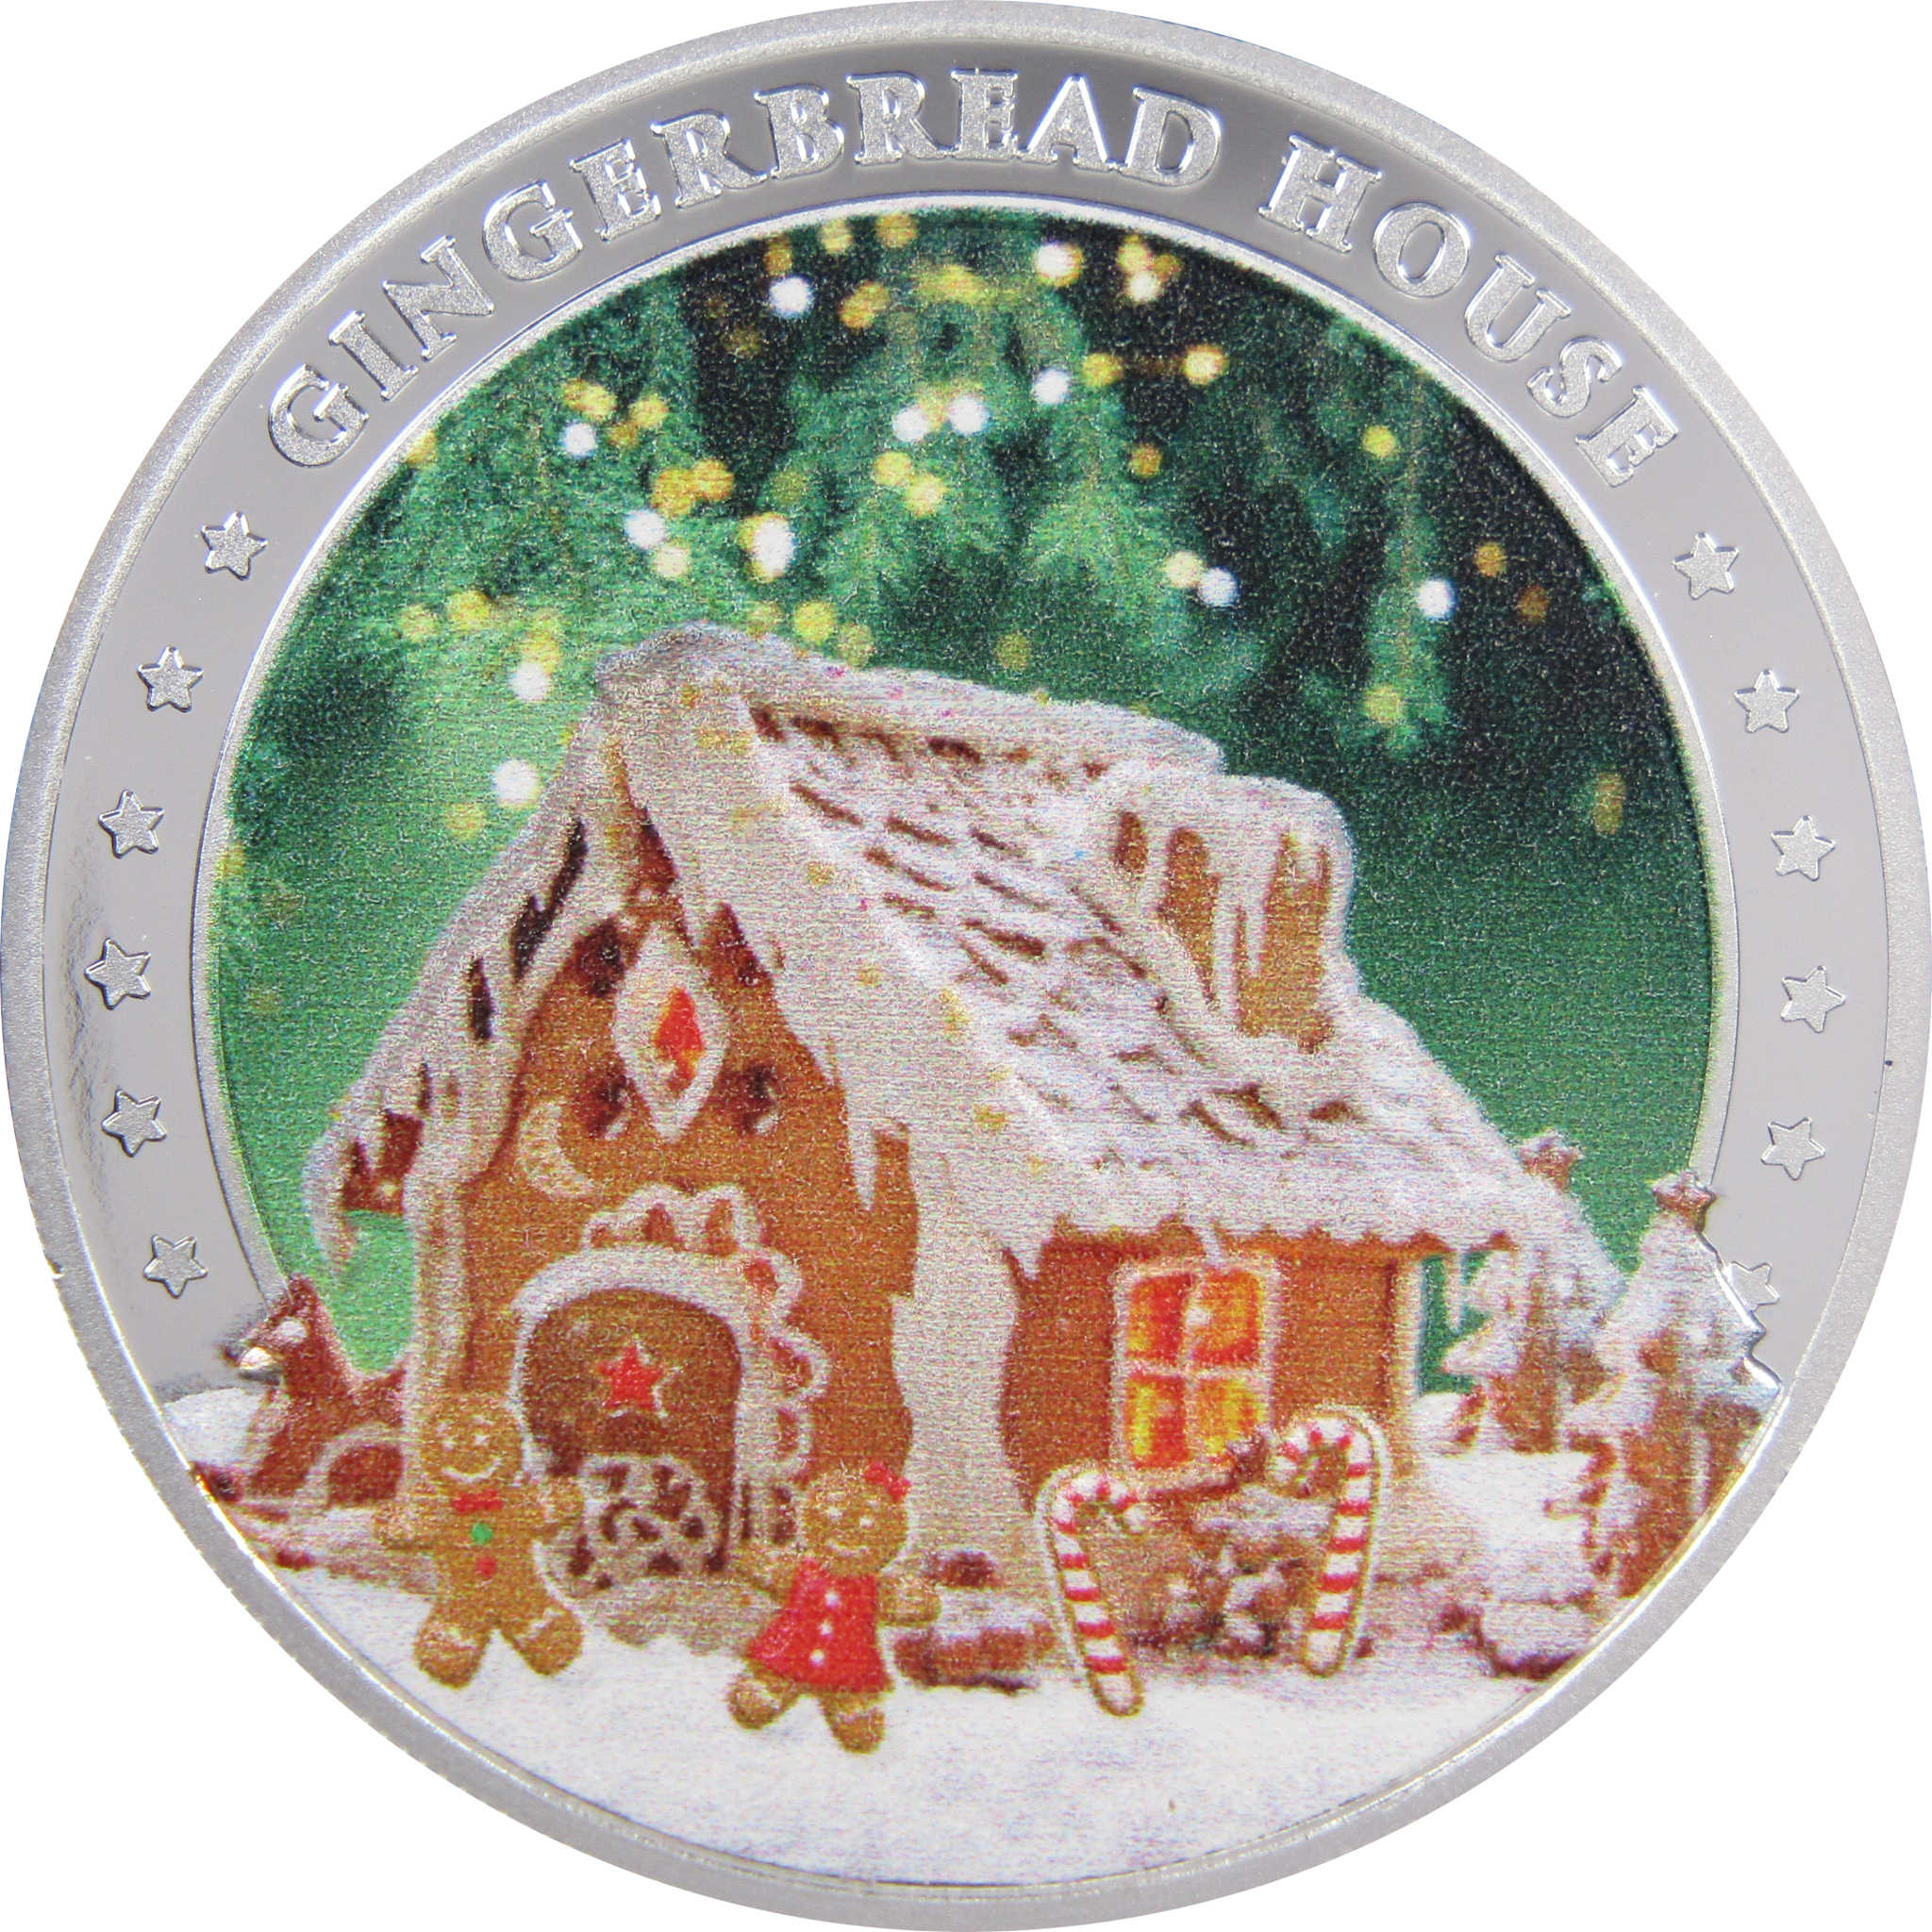 Gingerbread House 1 oz .999 Fine Silver $2 Colorized Proof-like Coin 2022 Fiji